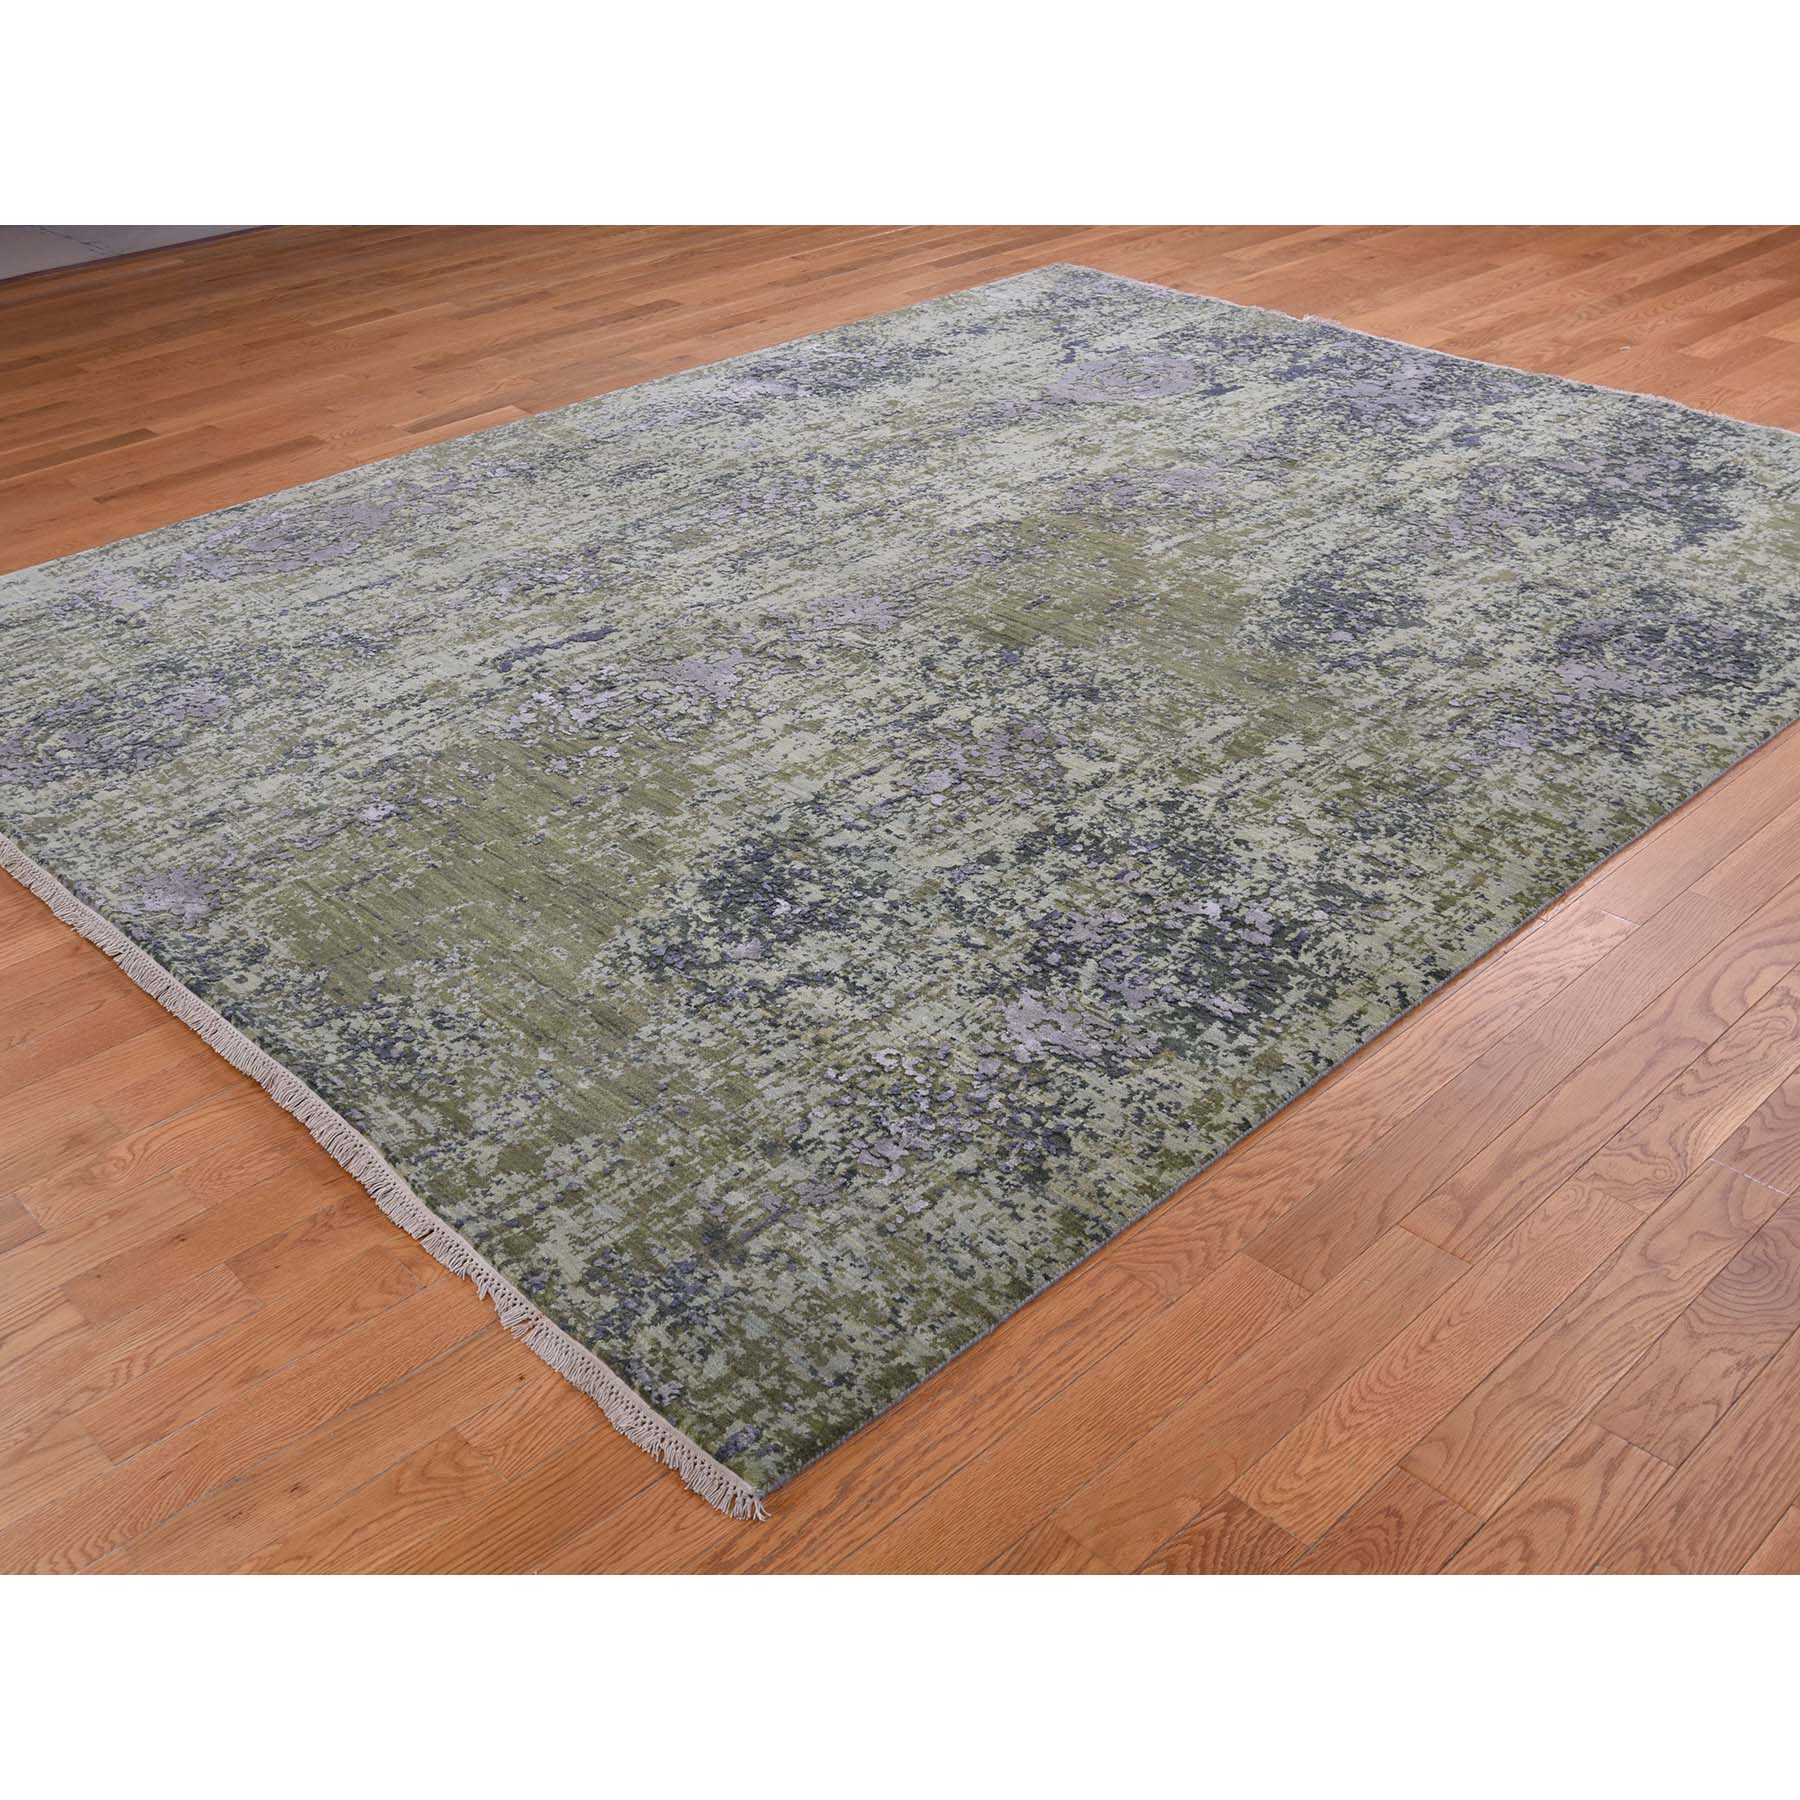 8-1 x10- Pure Silk Modern Abstract Design Hand-Knotted Rug 